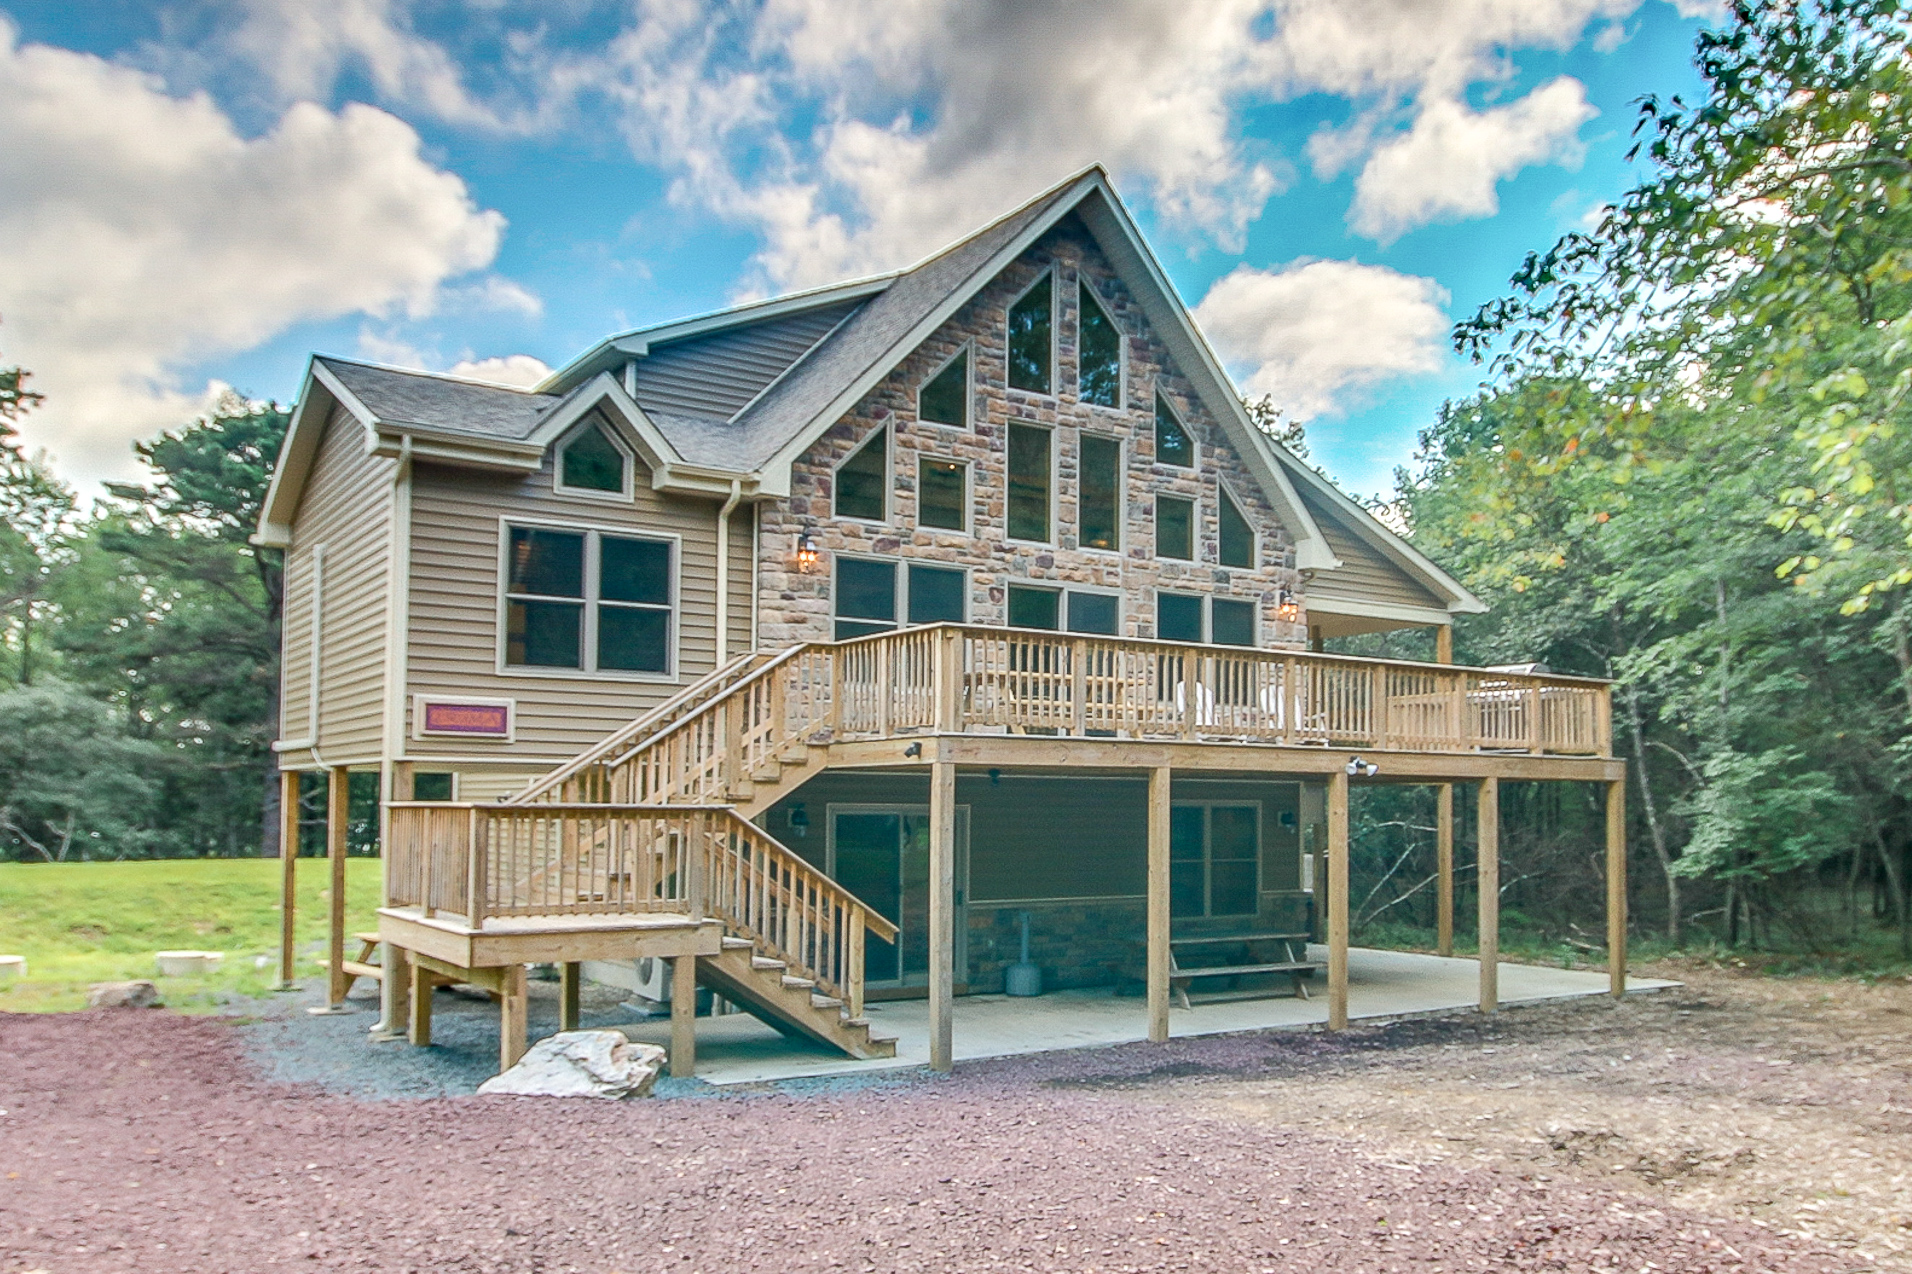 Ziruma Albrightsville 7 Bedroom Family Vacation Home Sleeps 22 With Hot Tub And Community Pool